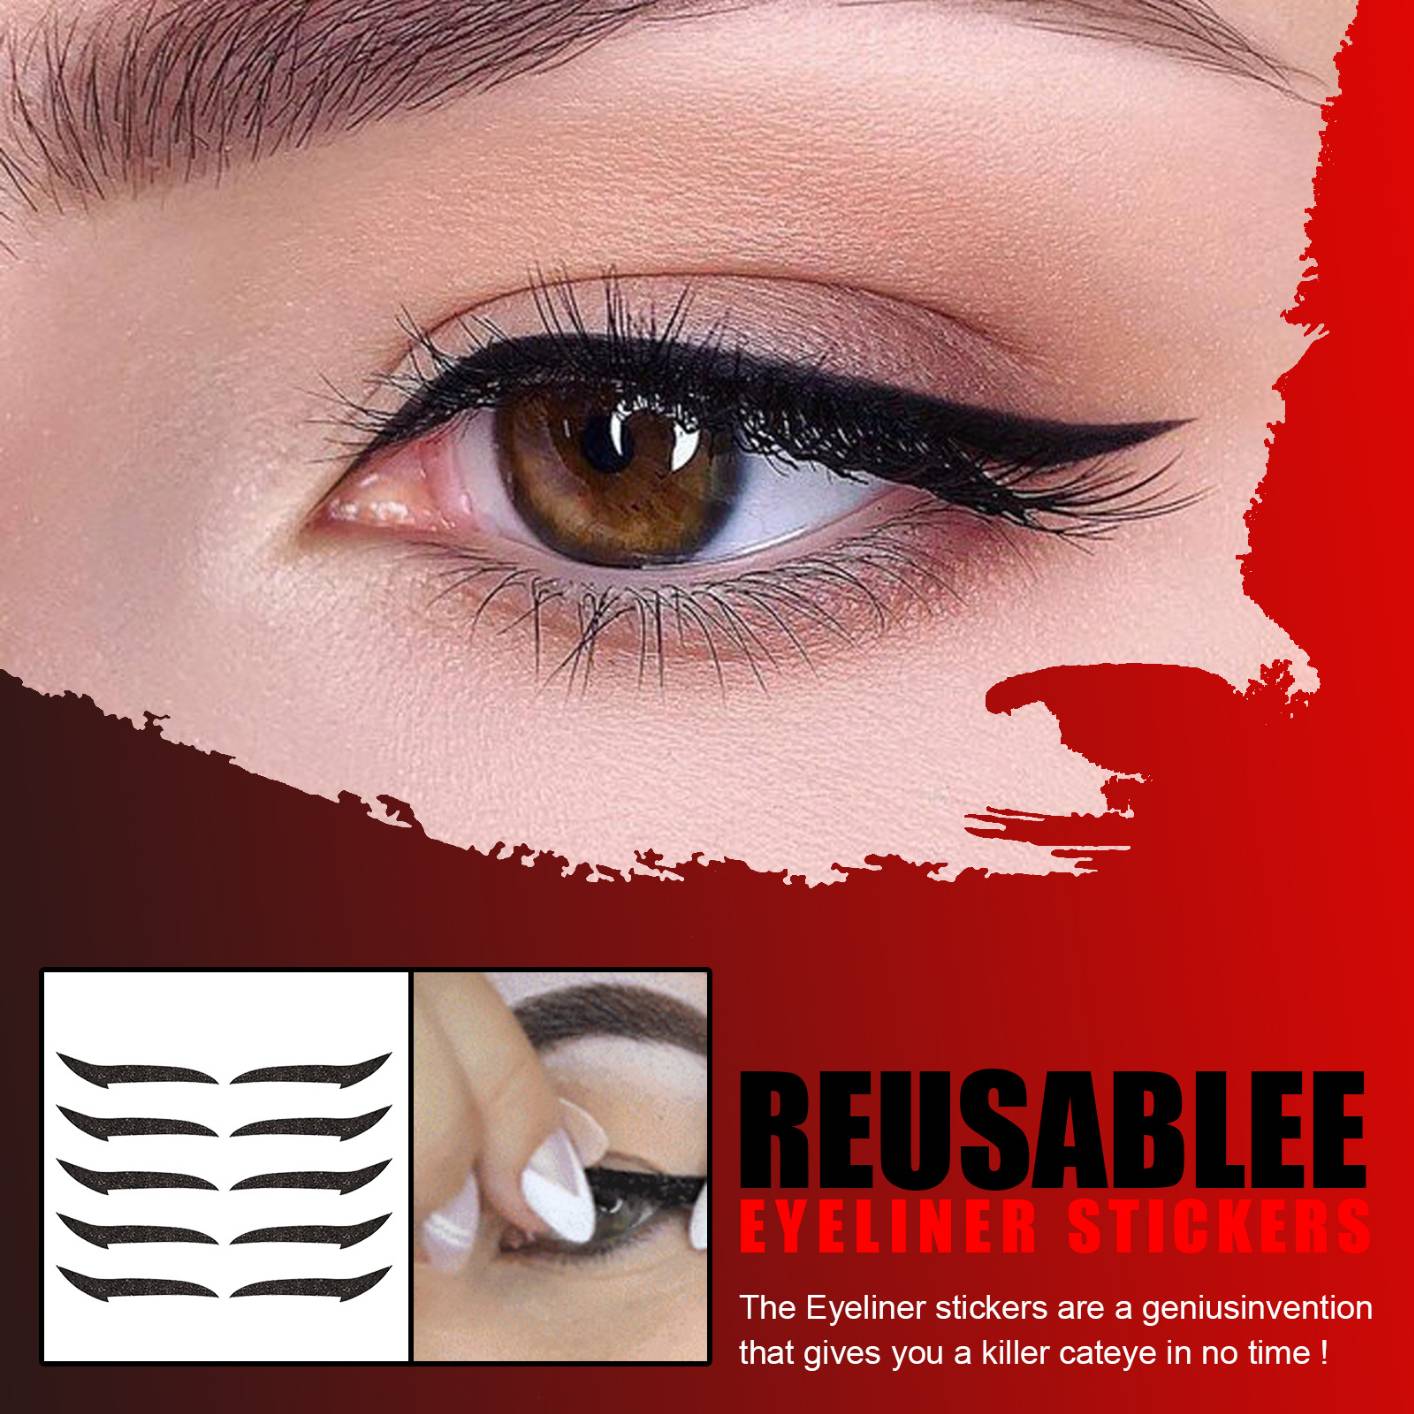 40 Pairs Eyeliner Stickers Tape Reusable Eyelid Makeup Stickers Self-adhesive Eye Line Strip Sticker, Easy Quick Application and for You Who Love Make-up Single Side Adhesive Eye Decoration, 80 Pieces